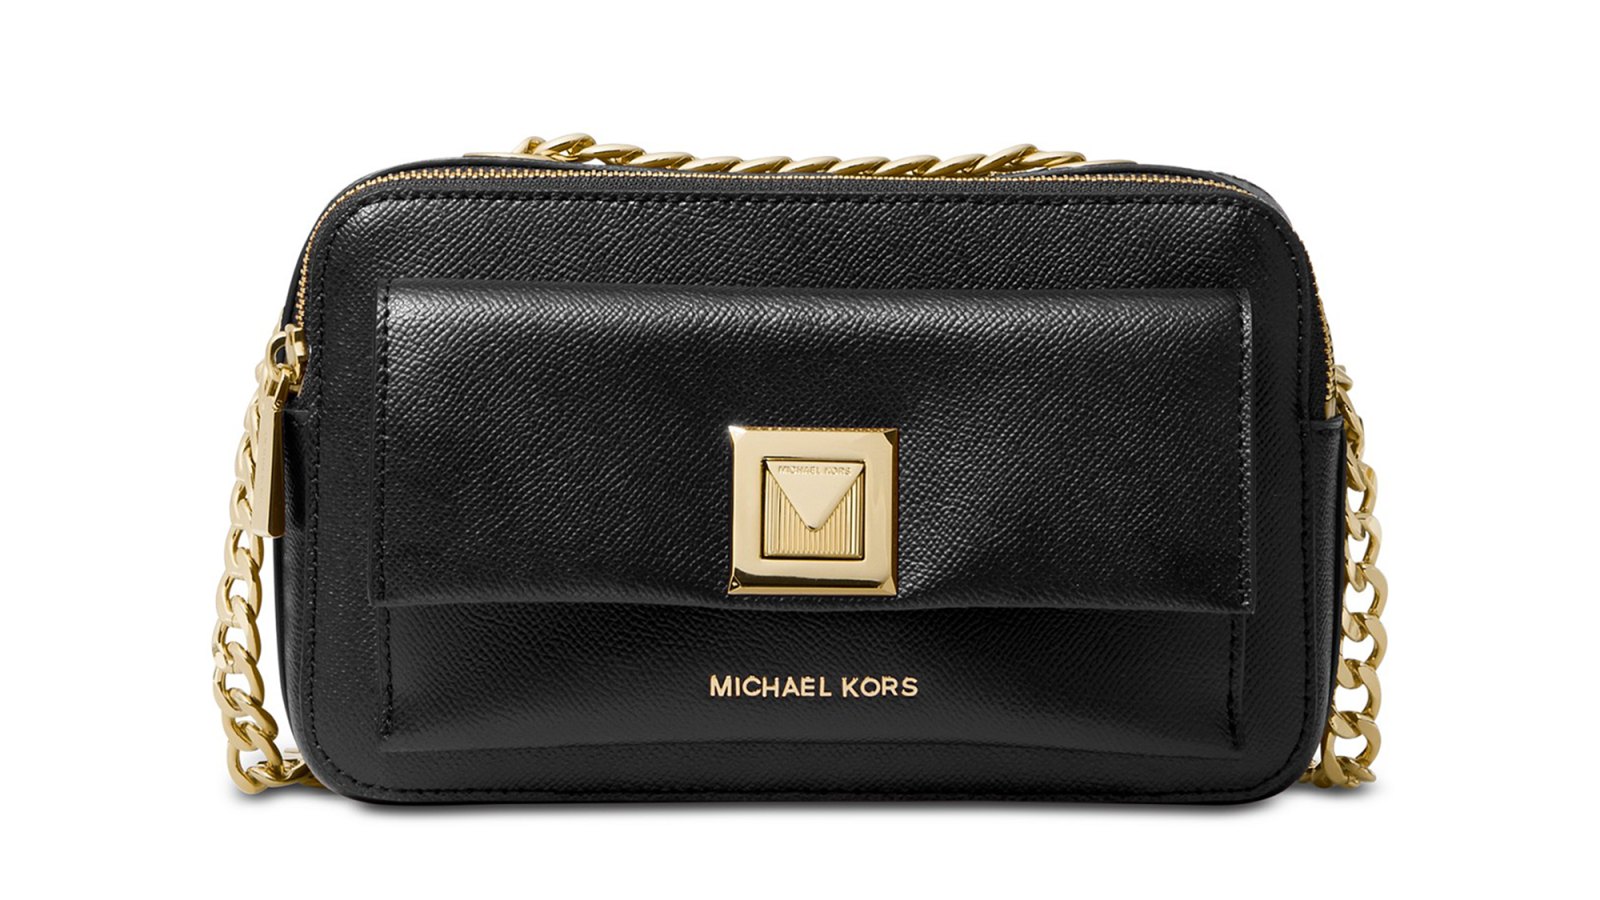 Michael Kors: Save 60% plus an extra 12% on designer purses and more